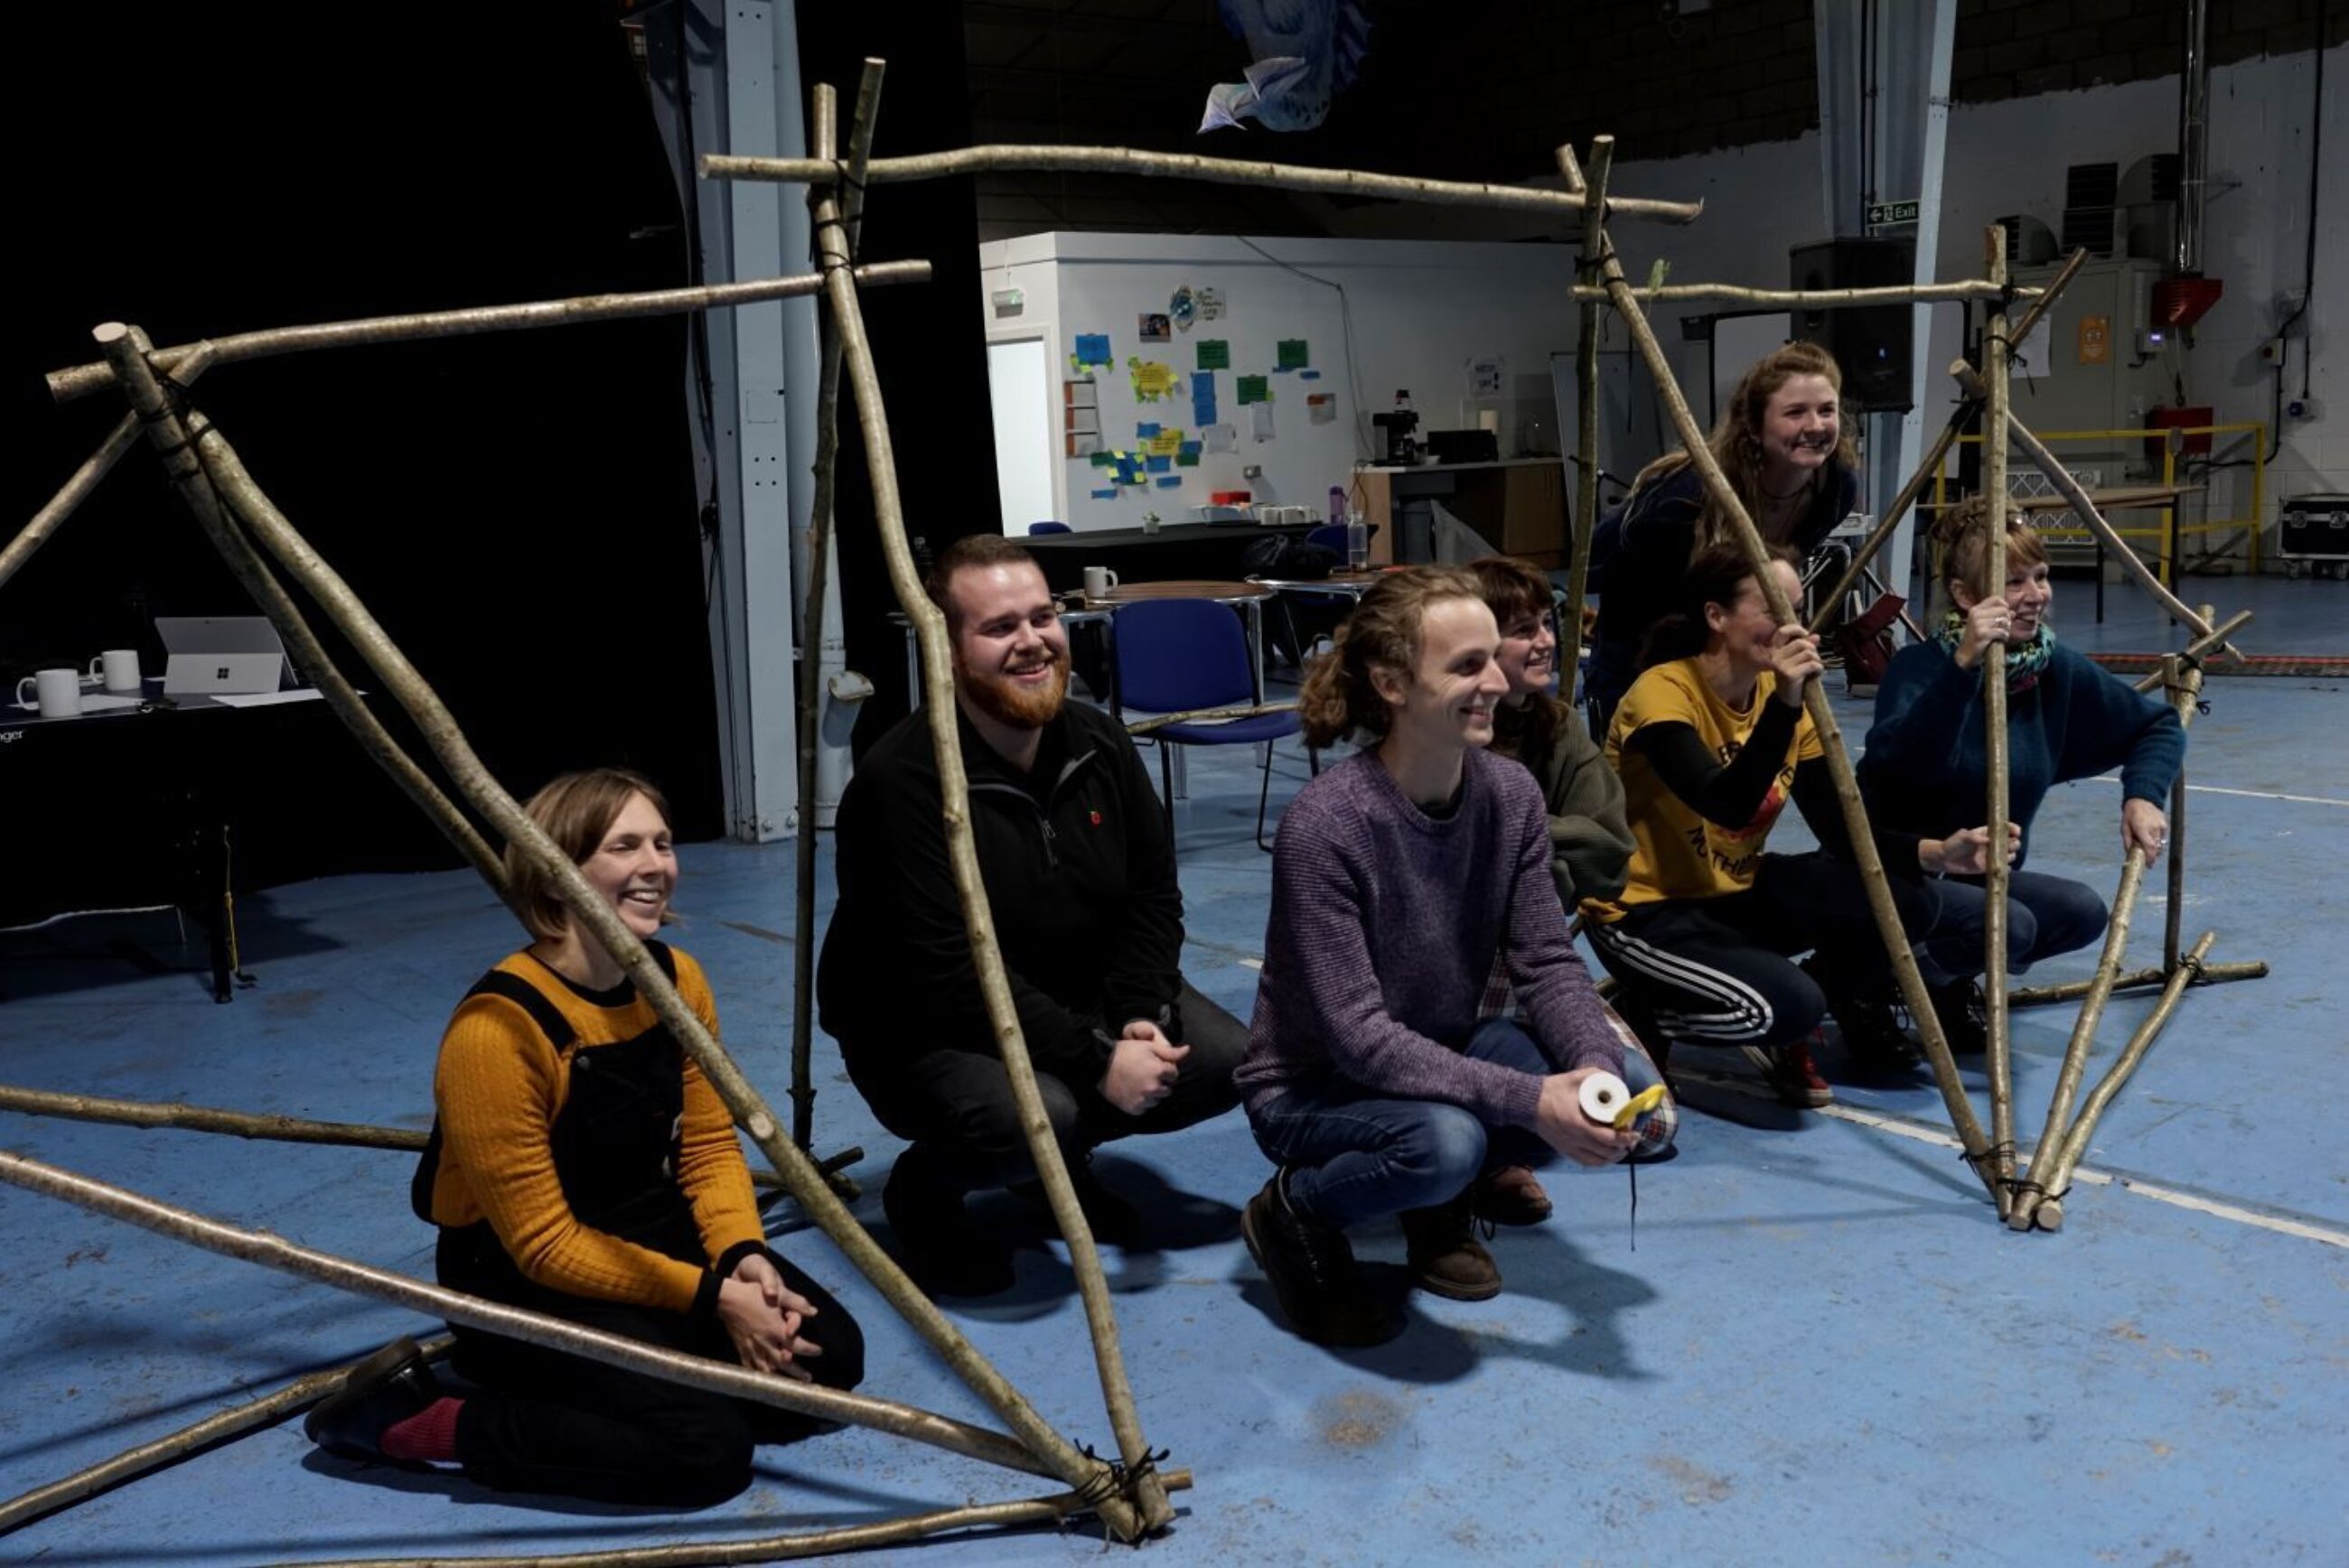 A group of people pose squatted in between structures that they've built out of branches and string.